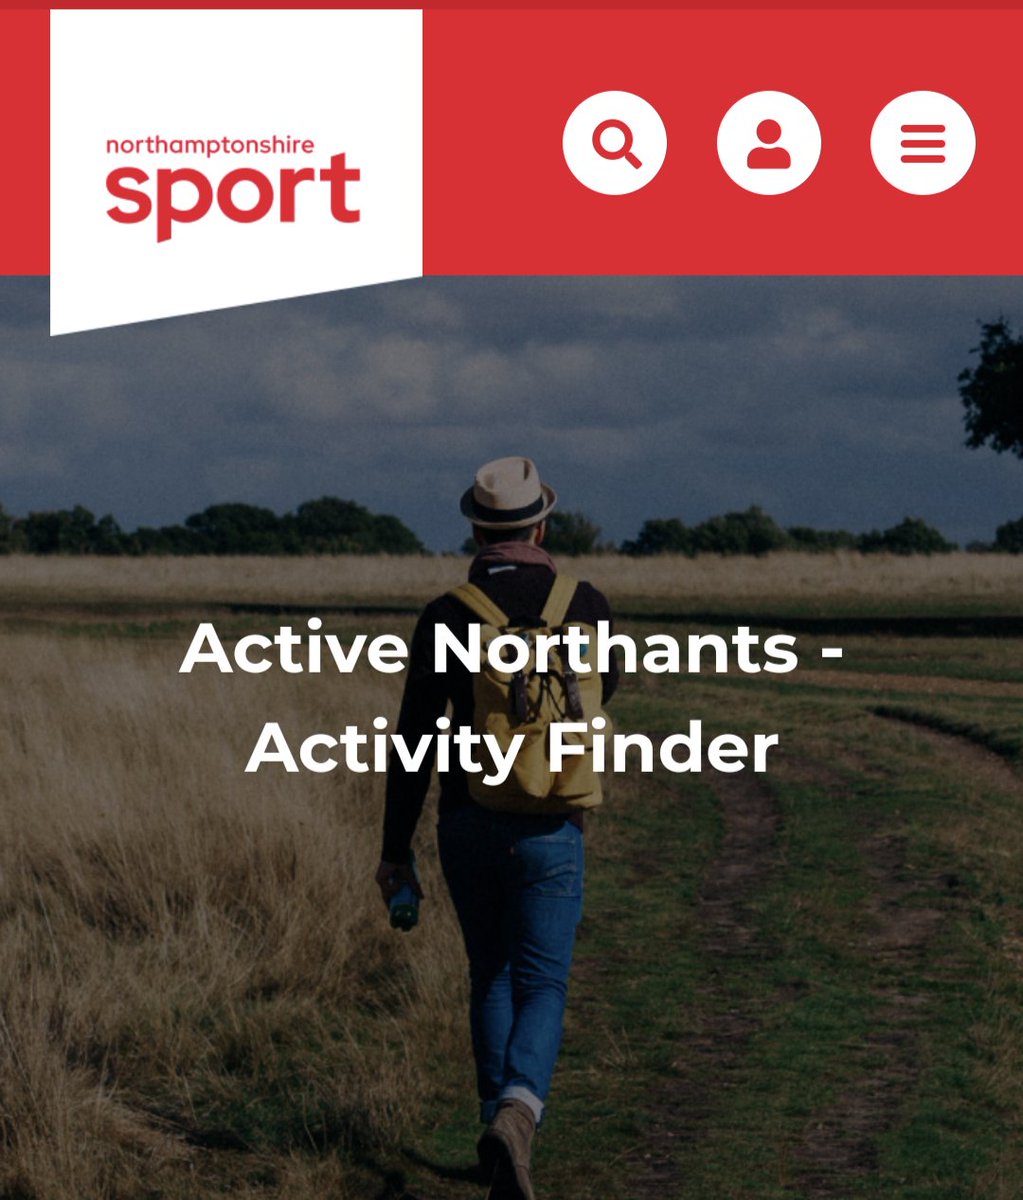 Looking for something active to do at the weekend? Search and find classes, clubs and groups happening where you like. Active Northants gives #Northamptonshire a helping hand in becoming a healthier, happier and more active place: northamptonshiresport.org/activity-finder @nsport #ActiveApril